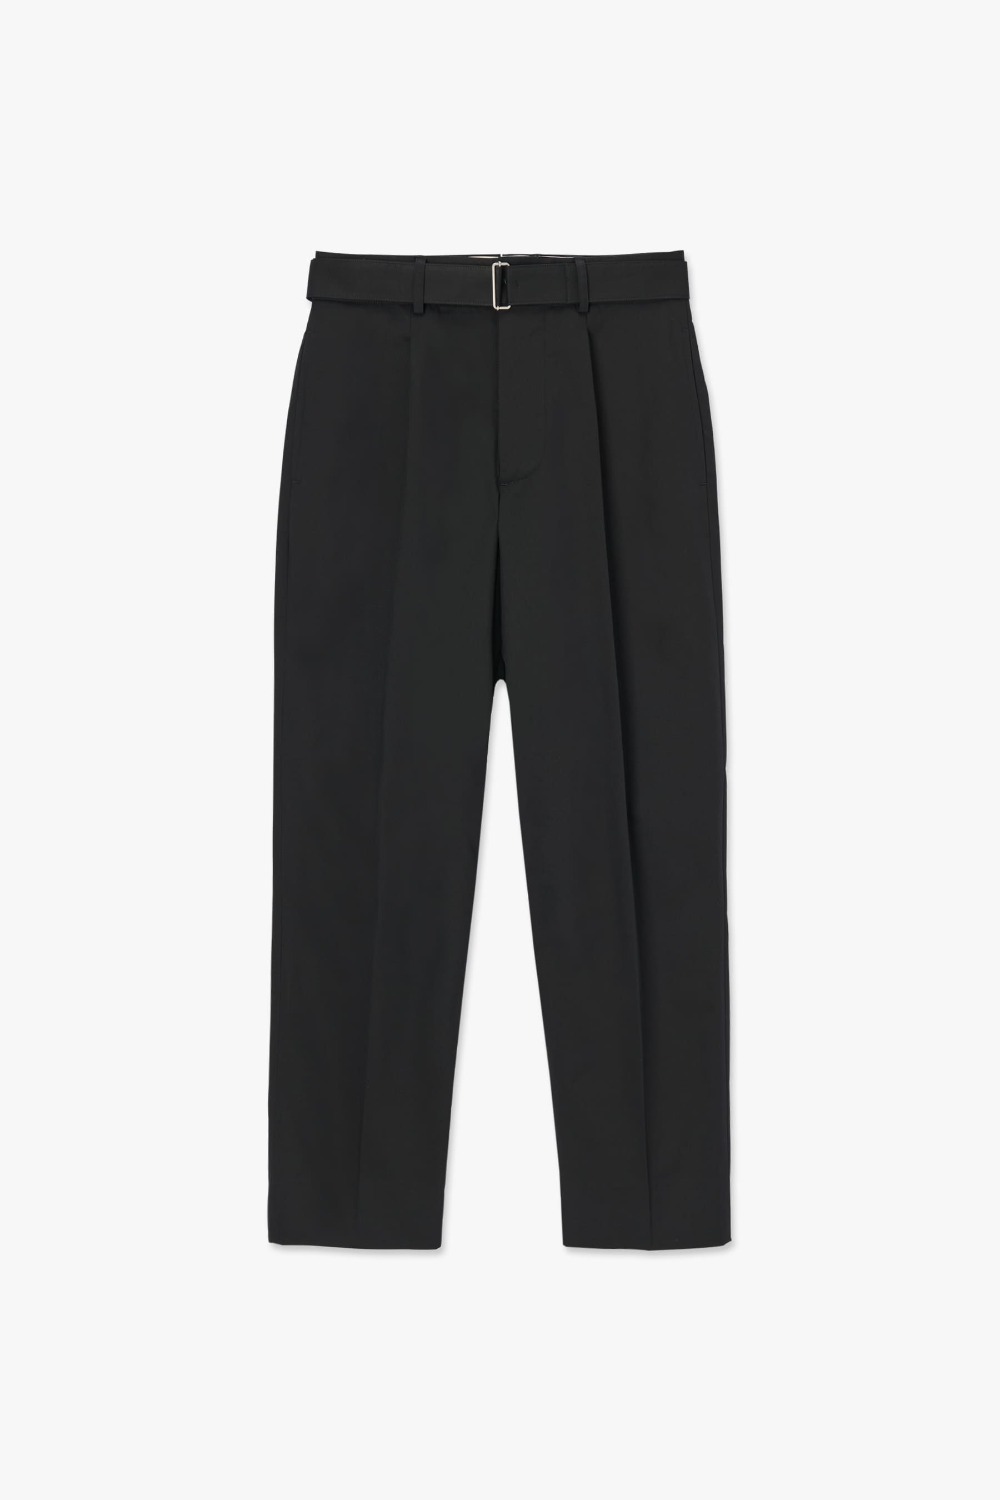 BLACK ONE TUCK COTTON BELTED PANTS 03